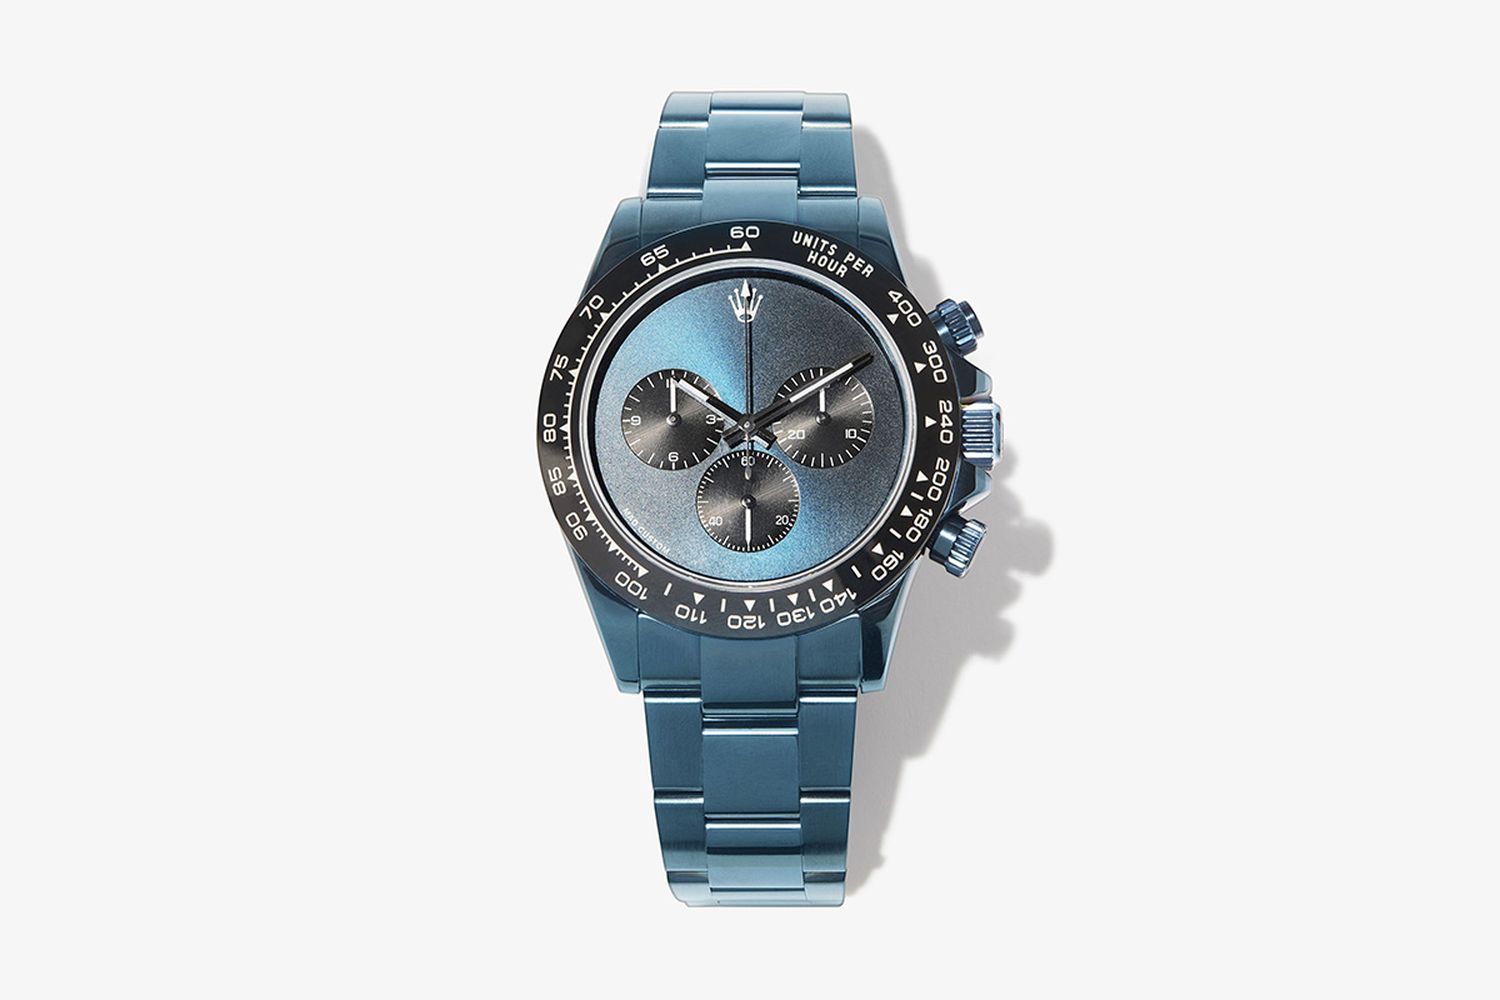 Customized Pre-Owned Rolex Cosmograph Daytona Watch